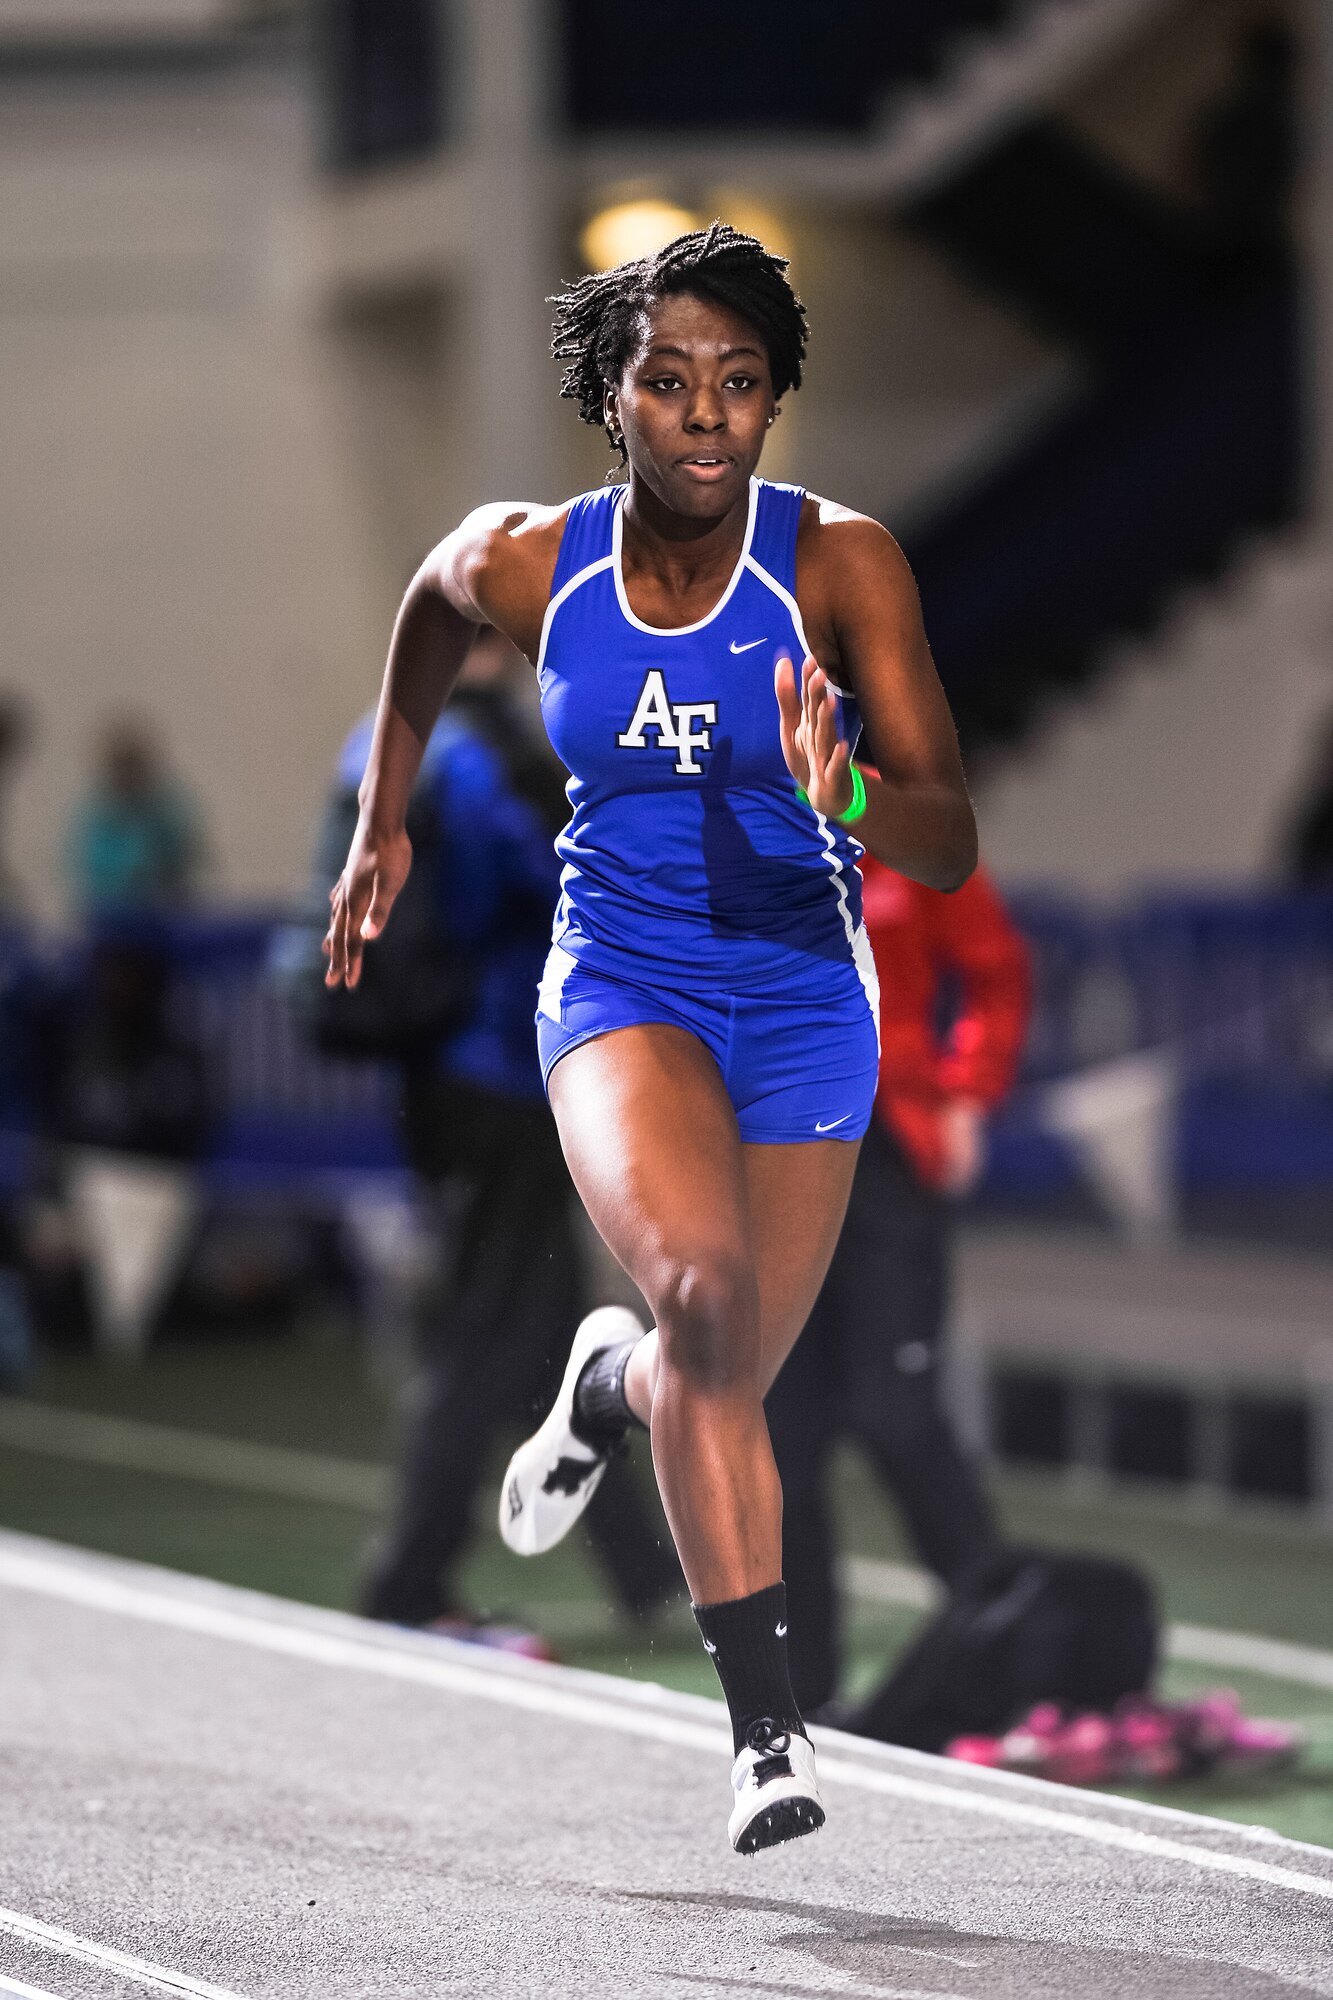 Funmi Akinlosotu gathers speed during the long jump event at the Air Force Track and Field Holiday Open at the Academy’s Cadet Field House’s indoor track Dec. 12, 2014. Akinlosotu, a freshman at the Academy, finished third at 35'5". (U.S. Air Force photo/Liz Copan)